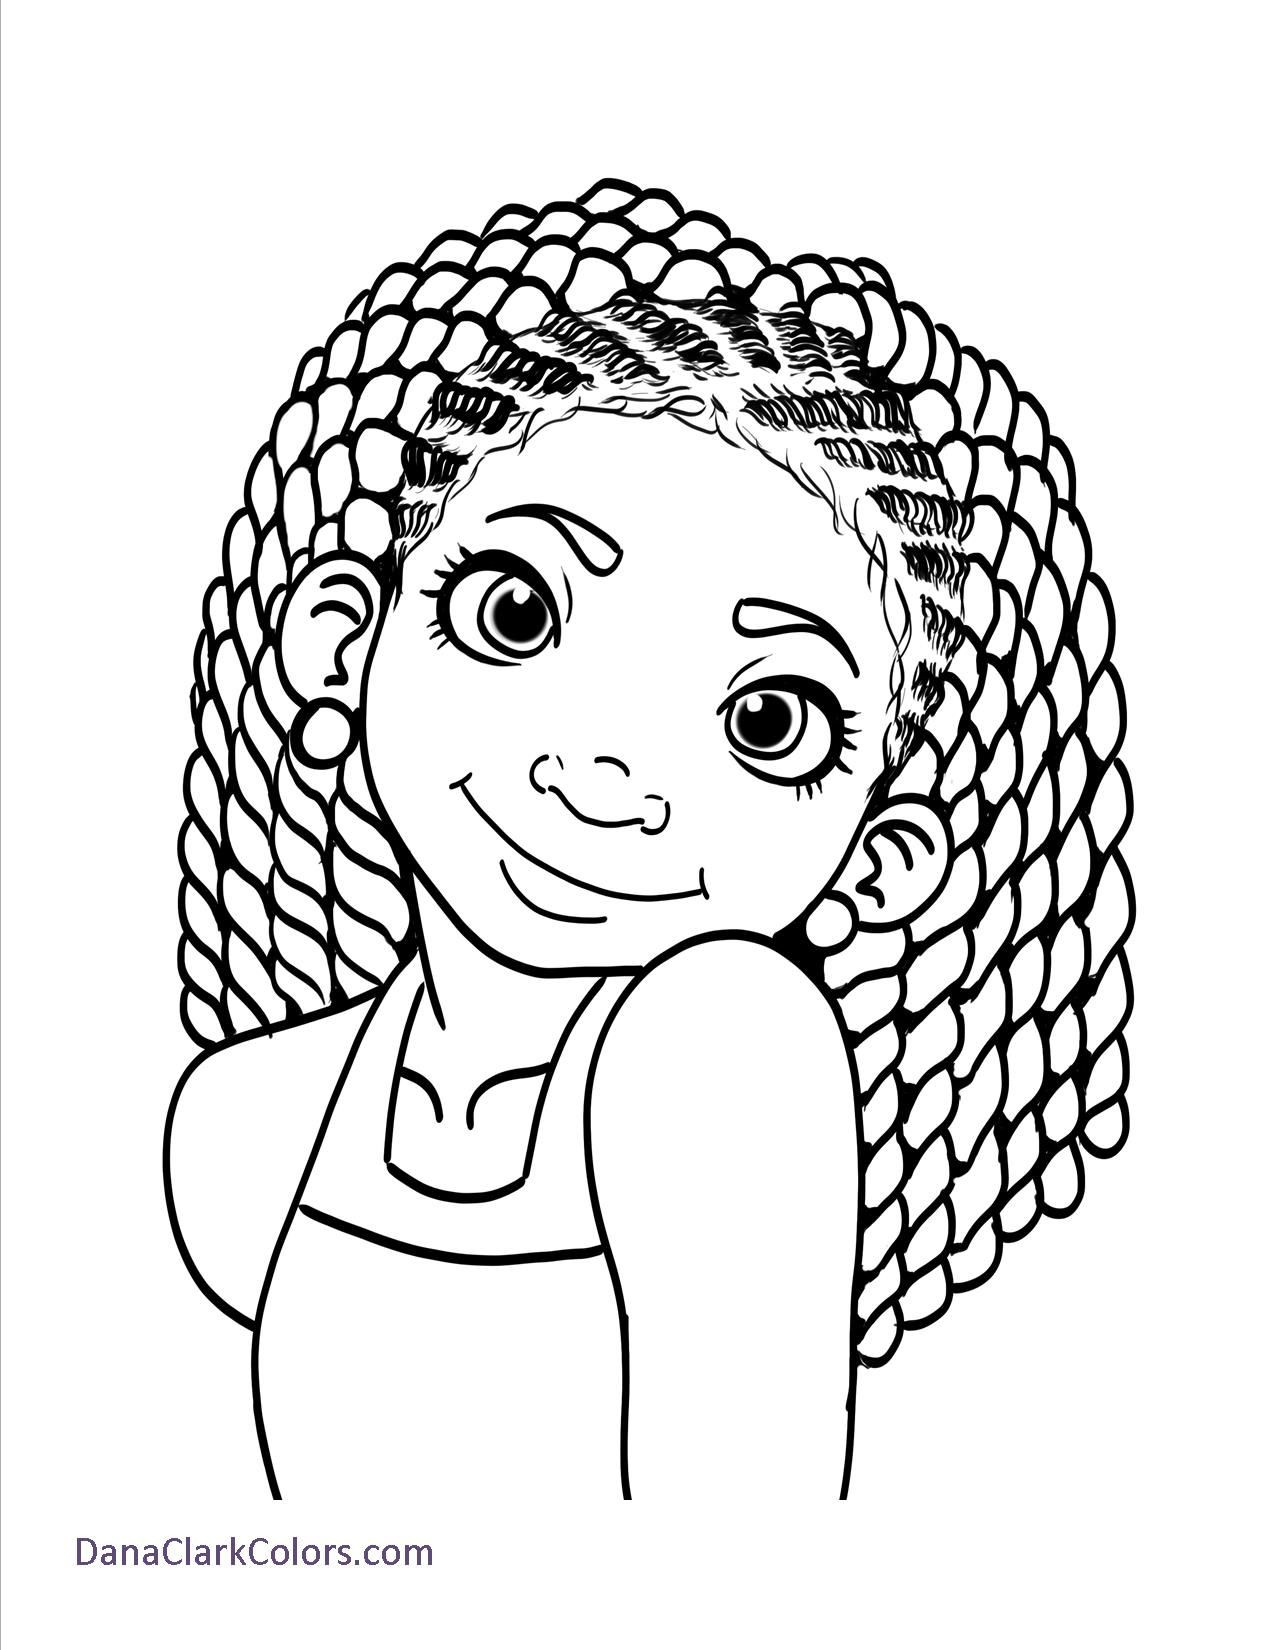 Black Girl Coloring Pages
 Free Coloring Page 1 School